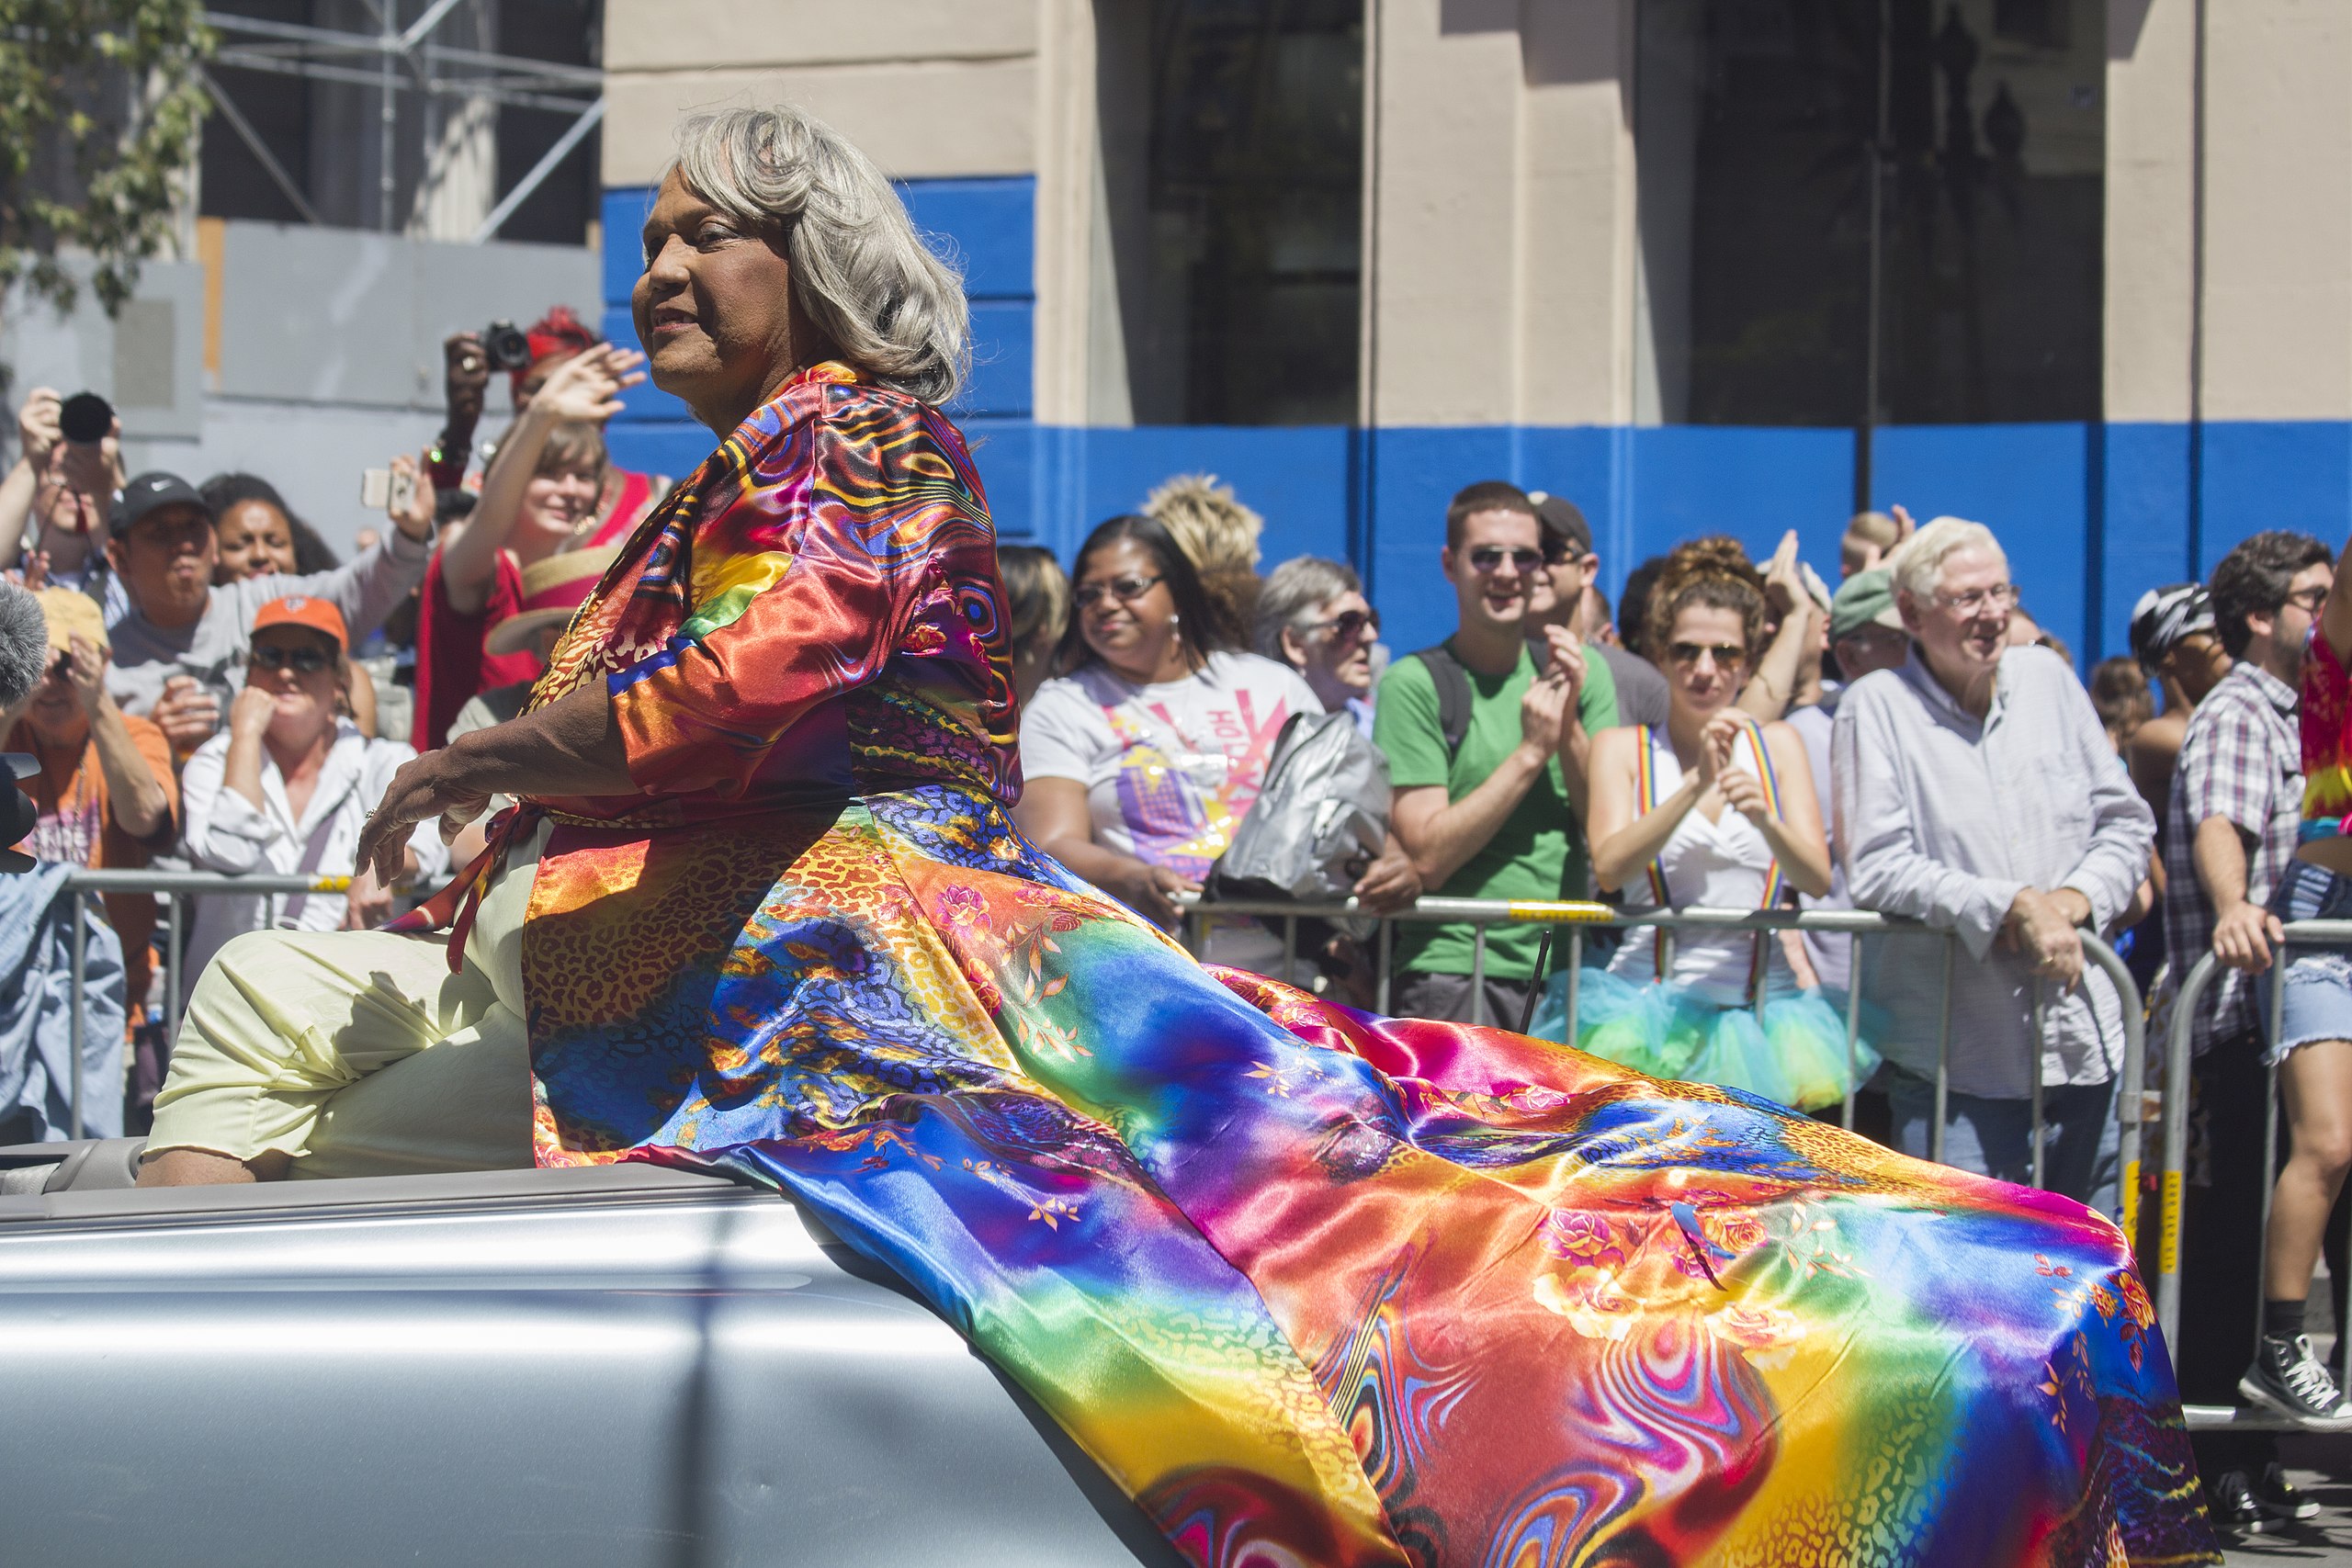 Miss Major Speaks: Miss Major Griffin-Gracy rides in the back of a convertible car adorned in rainbow patterns at San Francisco Pride in 2014